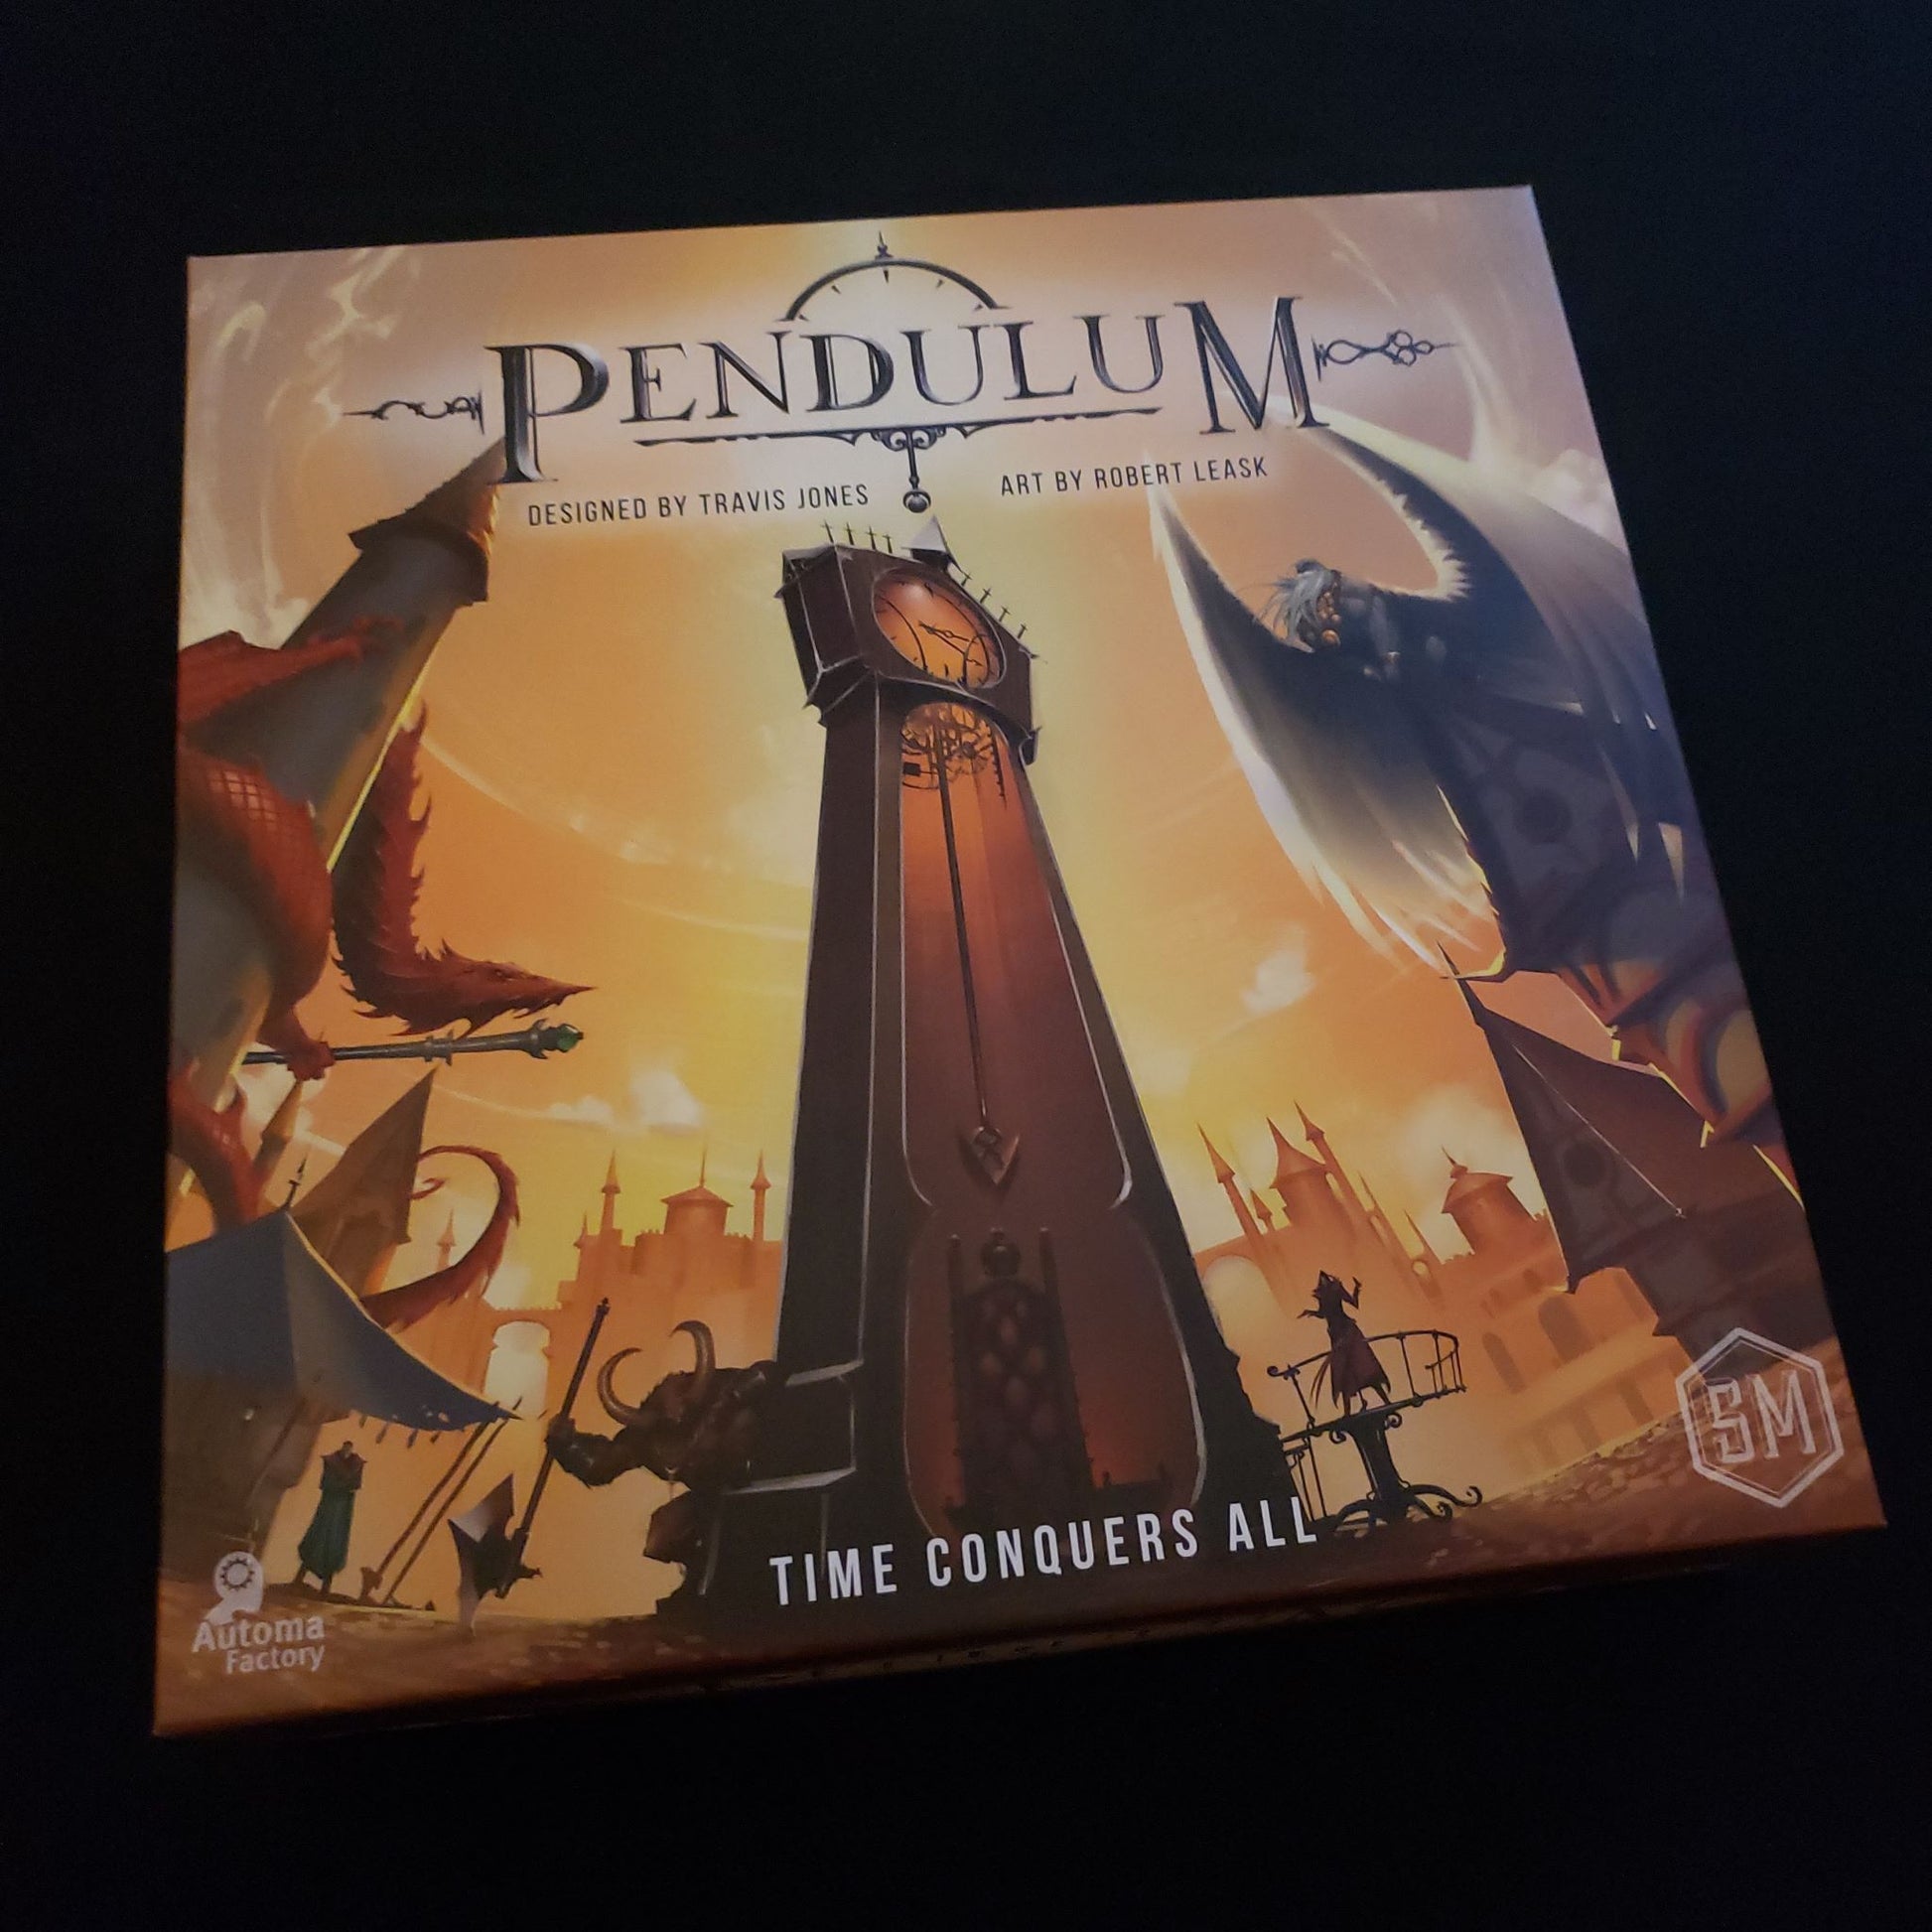 Pendulum board game - front cover of box